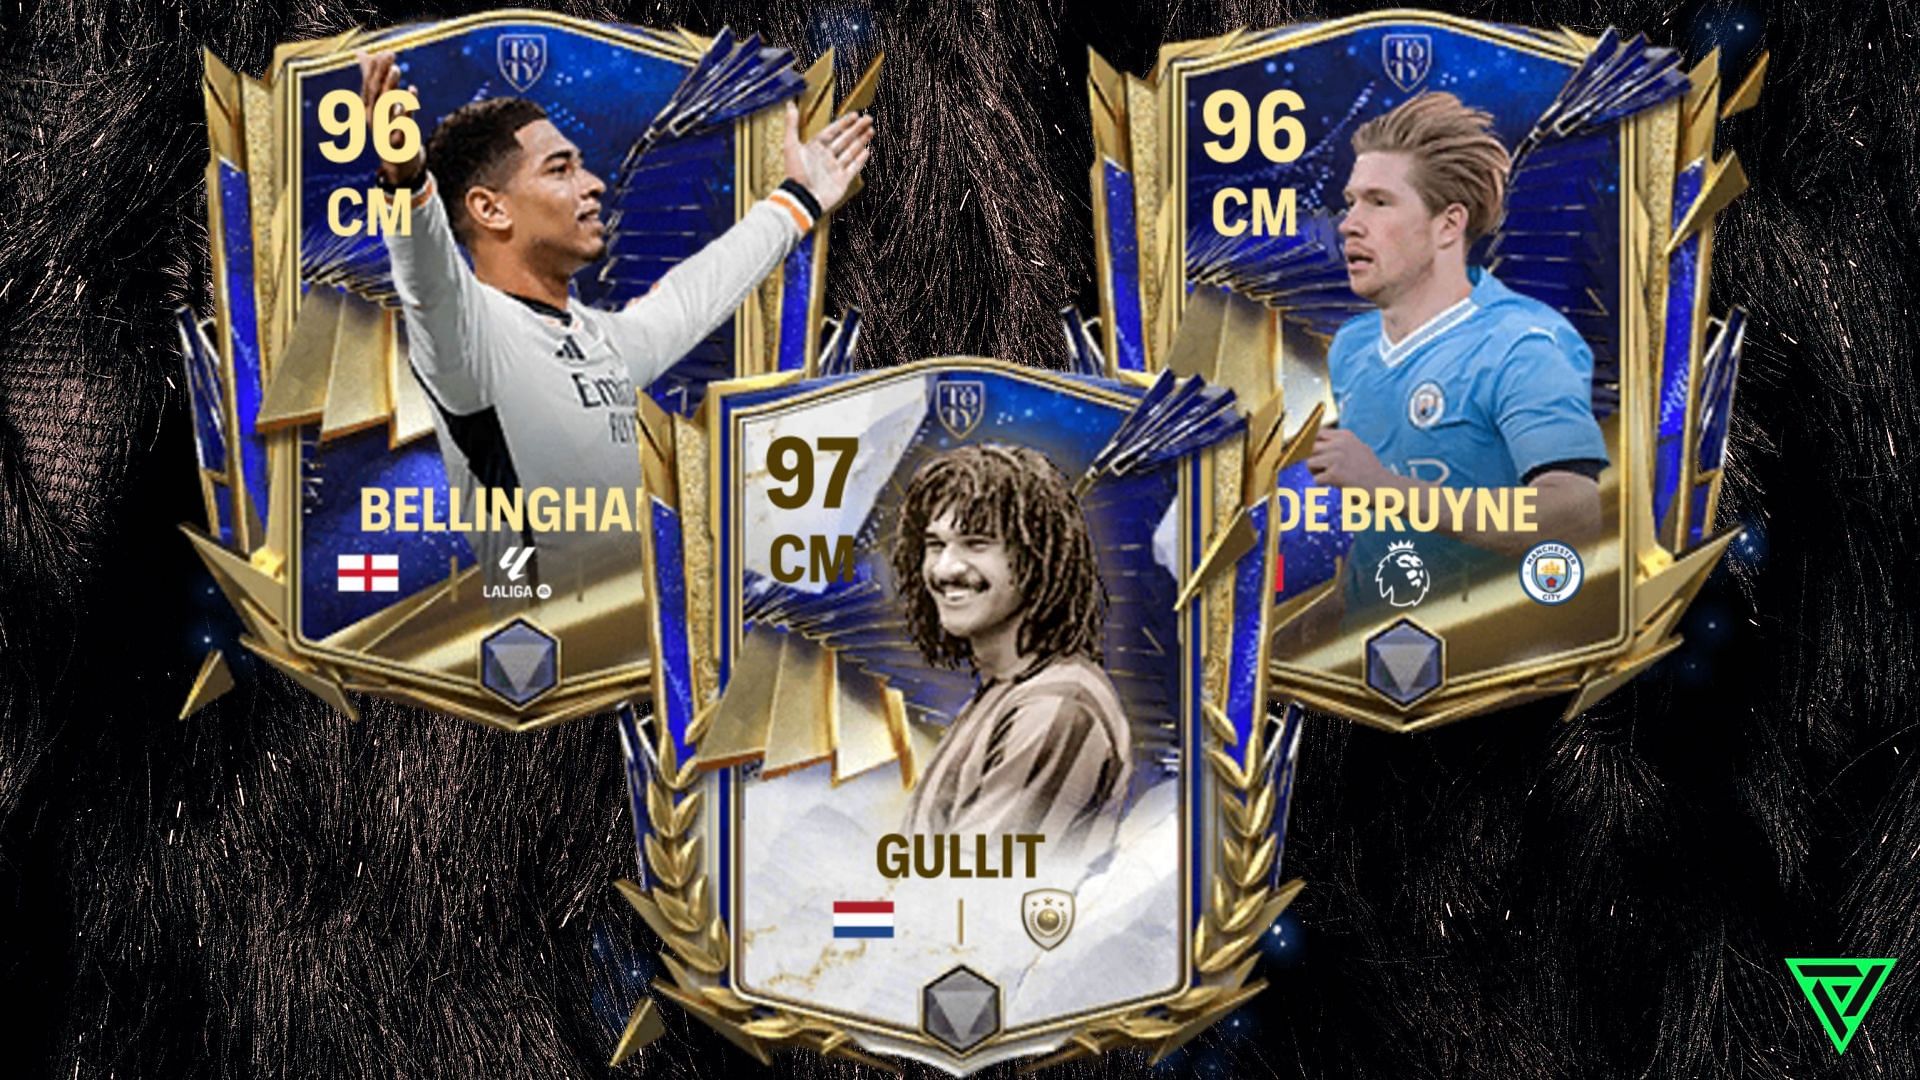 The list of Best FC Mobile central midfielders is dominated by the TOTY card version